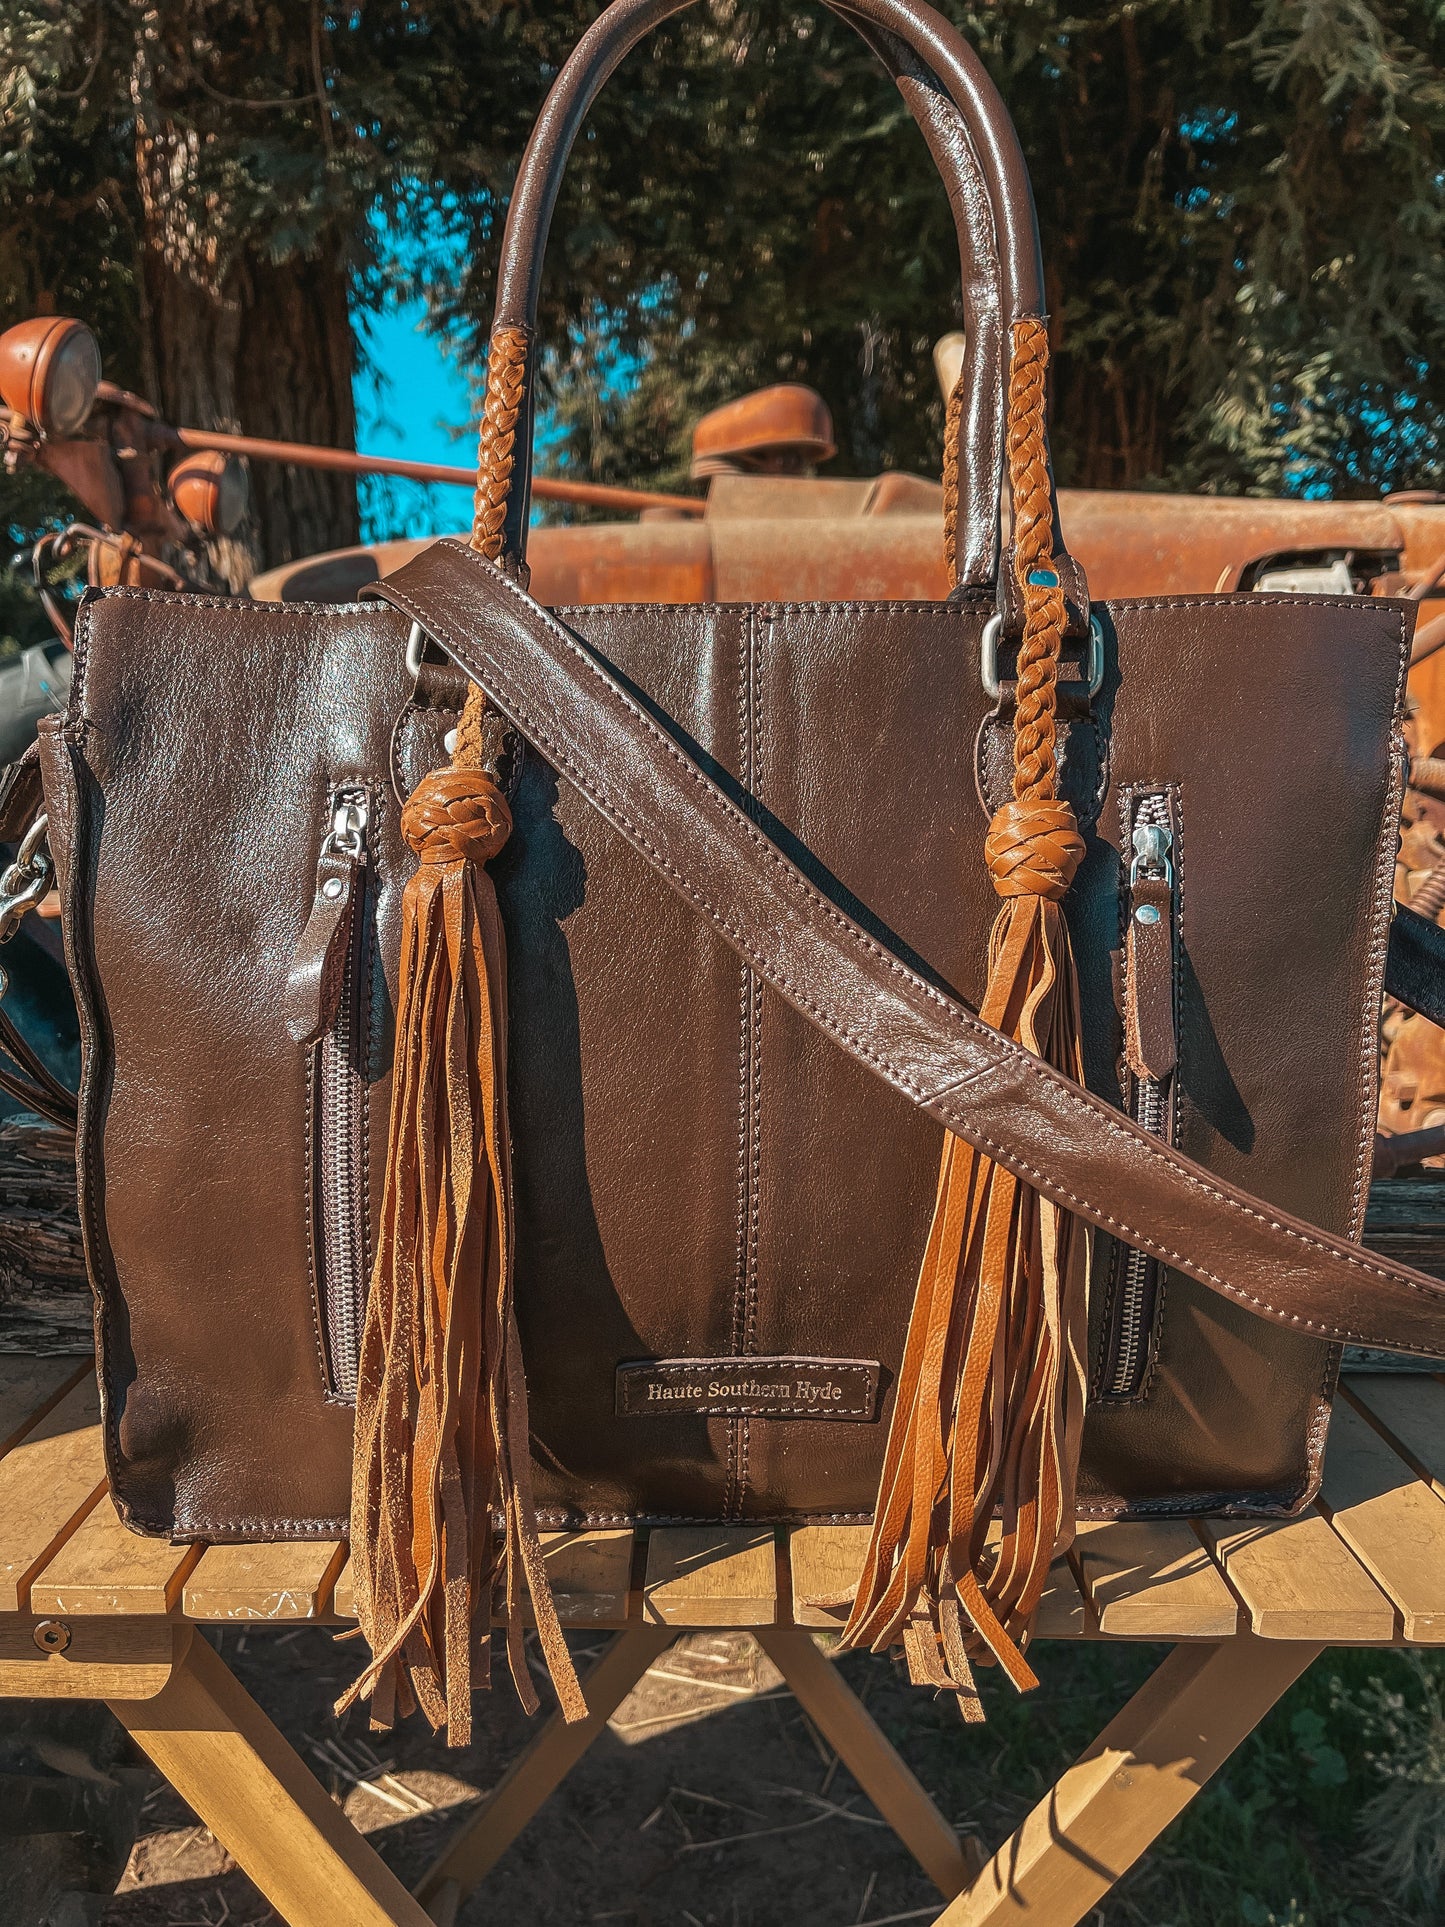 The Smoking Gun Tote Concealed Carry a Haute Southern Hyde by Beth Marie Exclusive